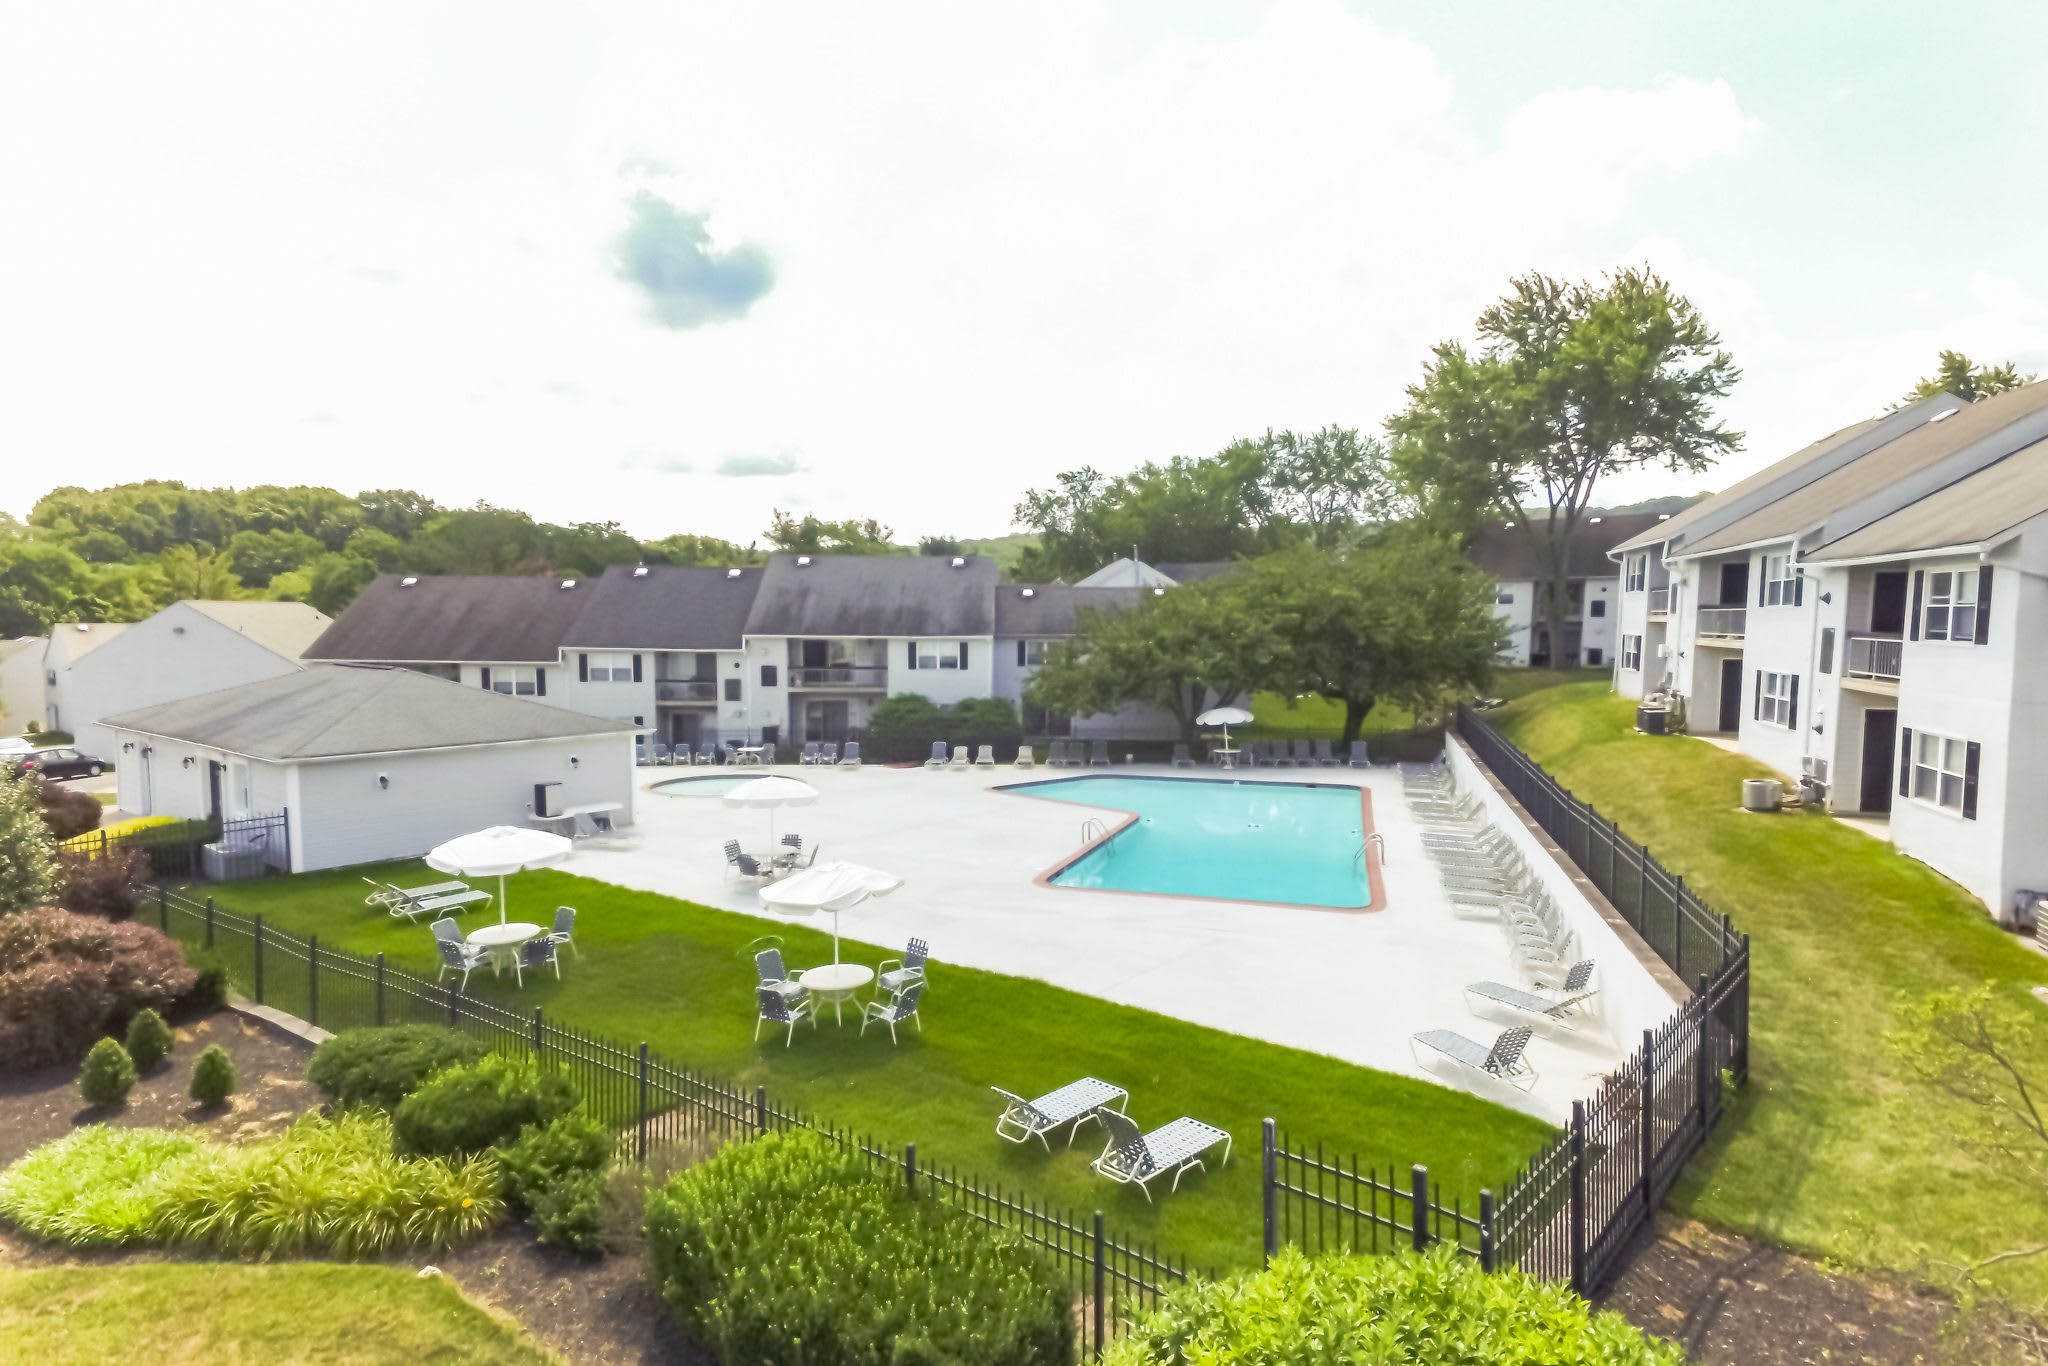 fenced pool and hot tub area at Westgate Village Apartments in Malvern, Pennsylvania